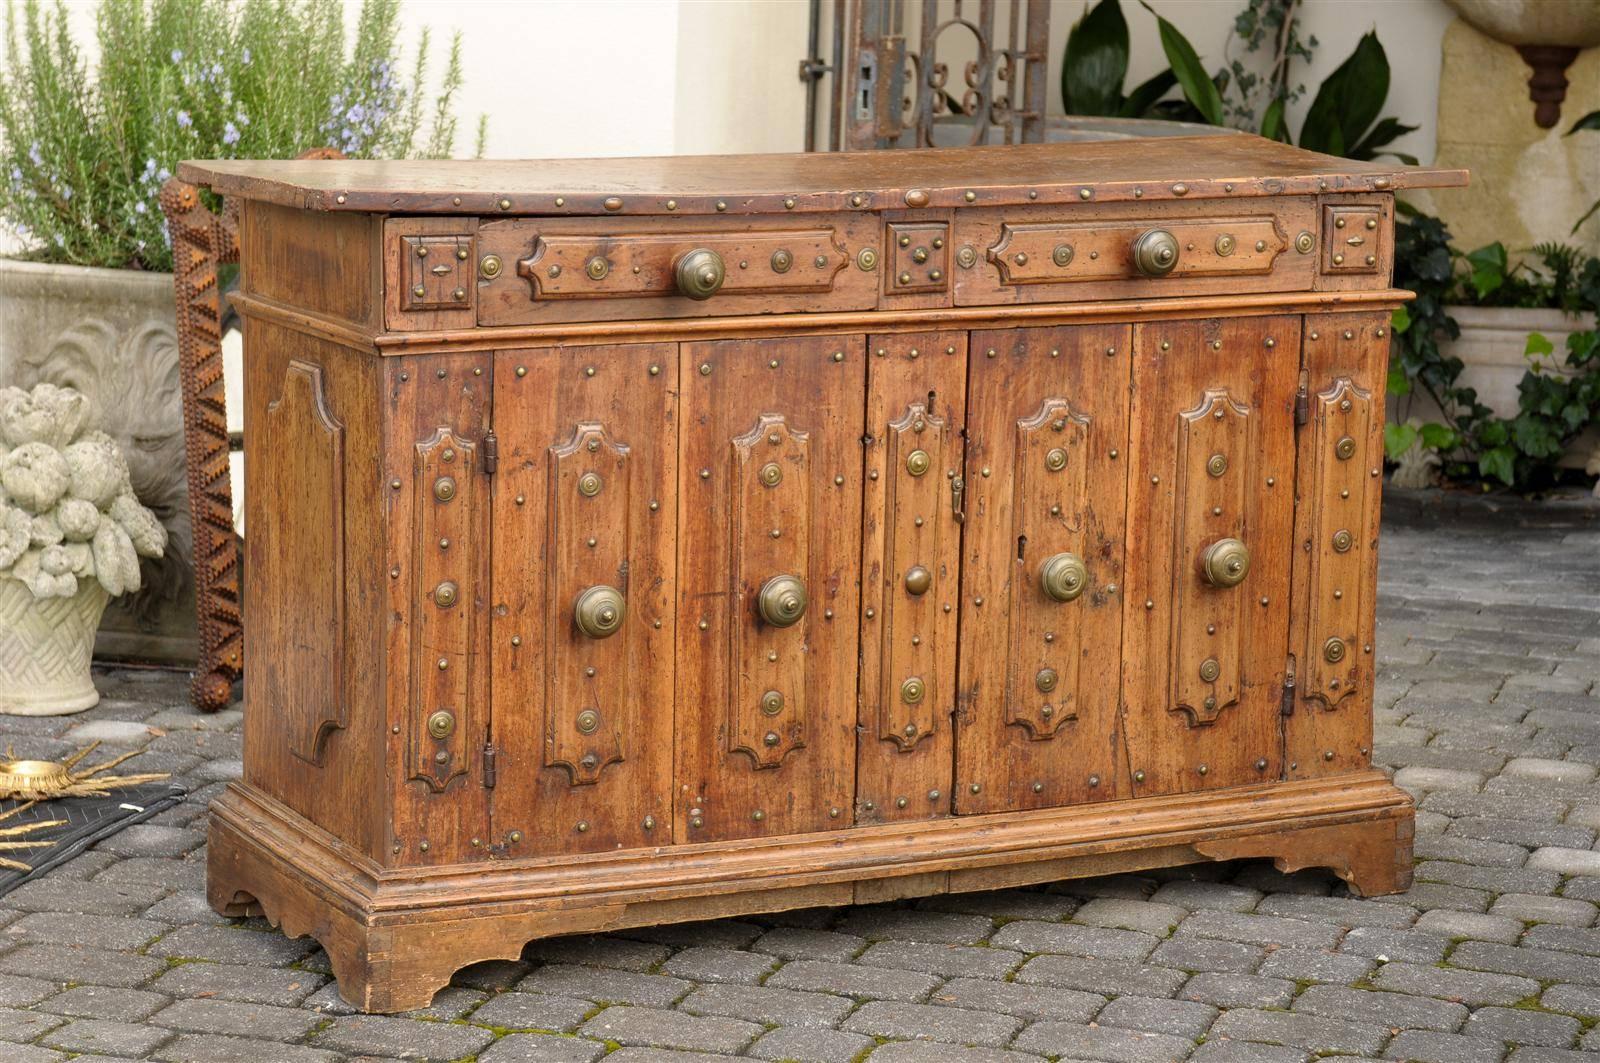 An Italian 17th century two-door buffet from Bologna with single drawer. This Northern Italian buffet from circa 1670 is made of a light walnut and has one full length drawer sitting above two doors made of four panels. This single drawer is